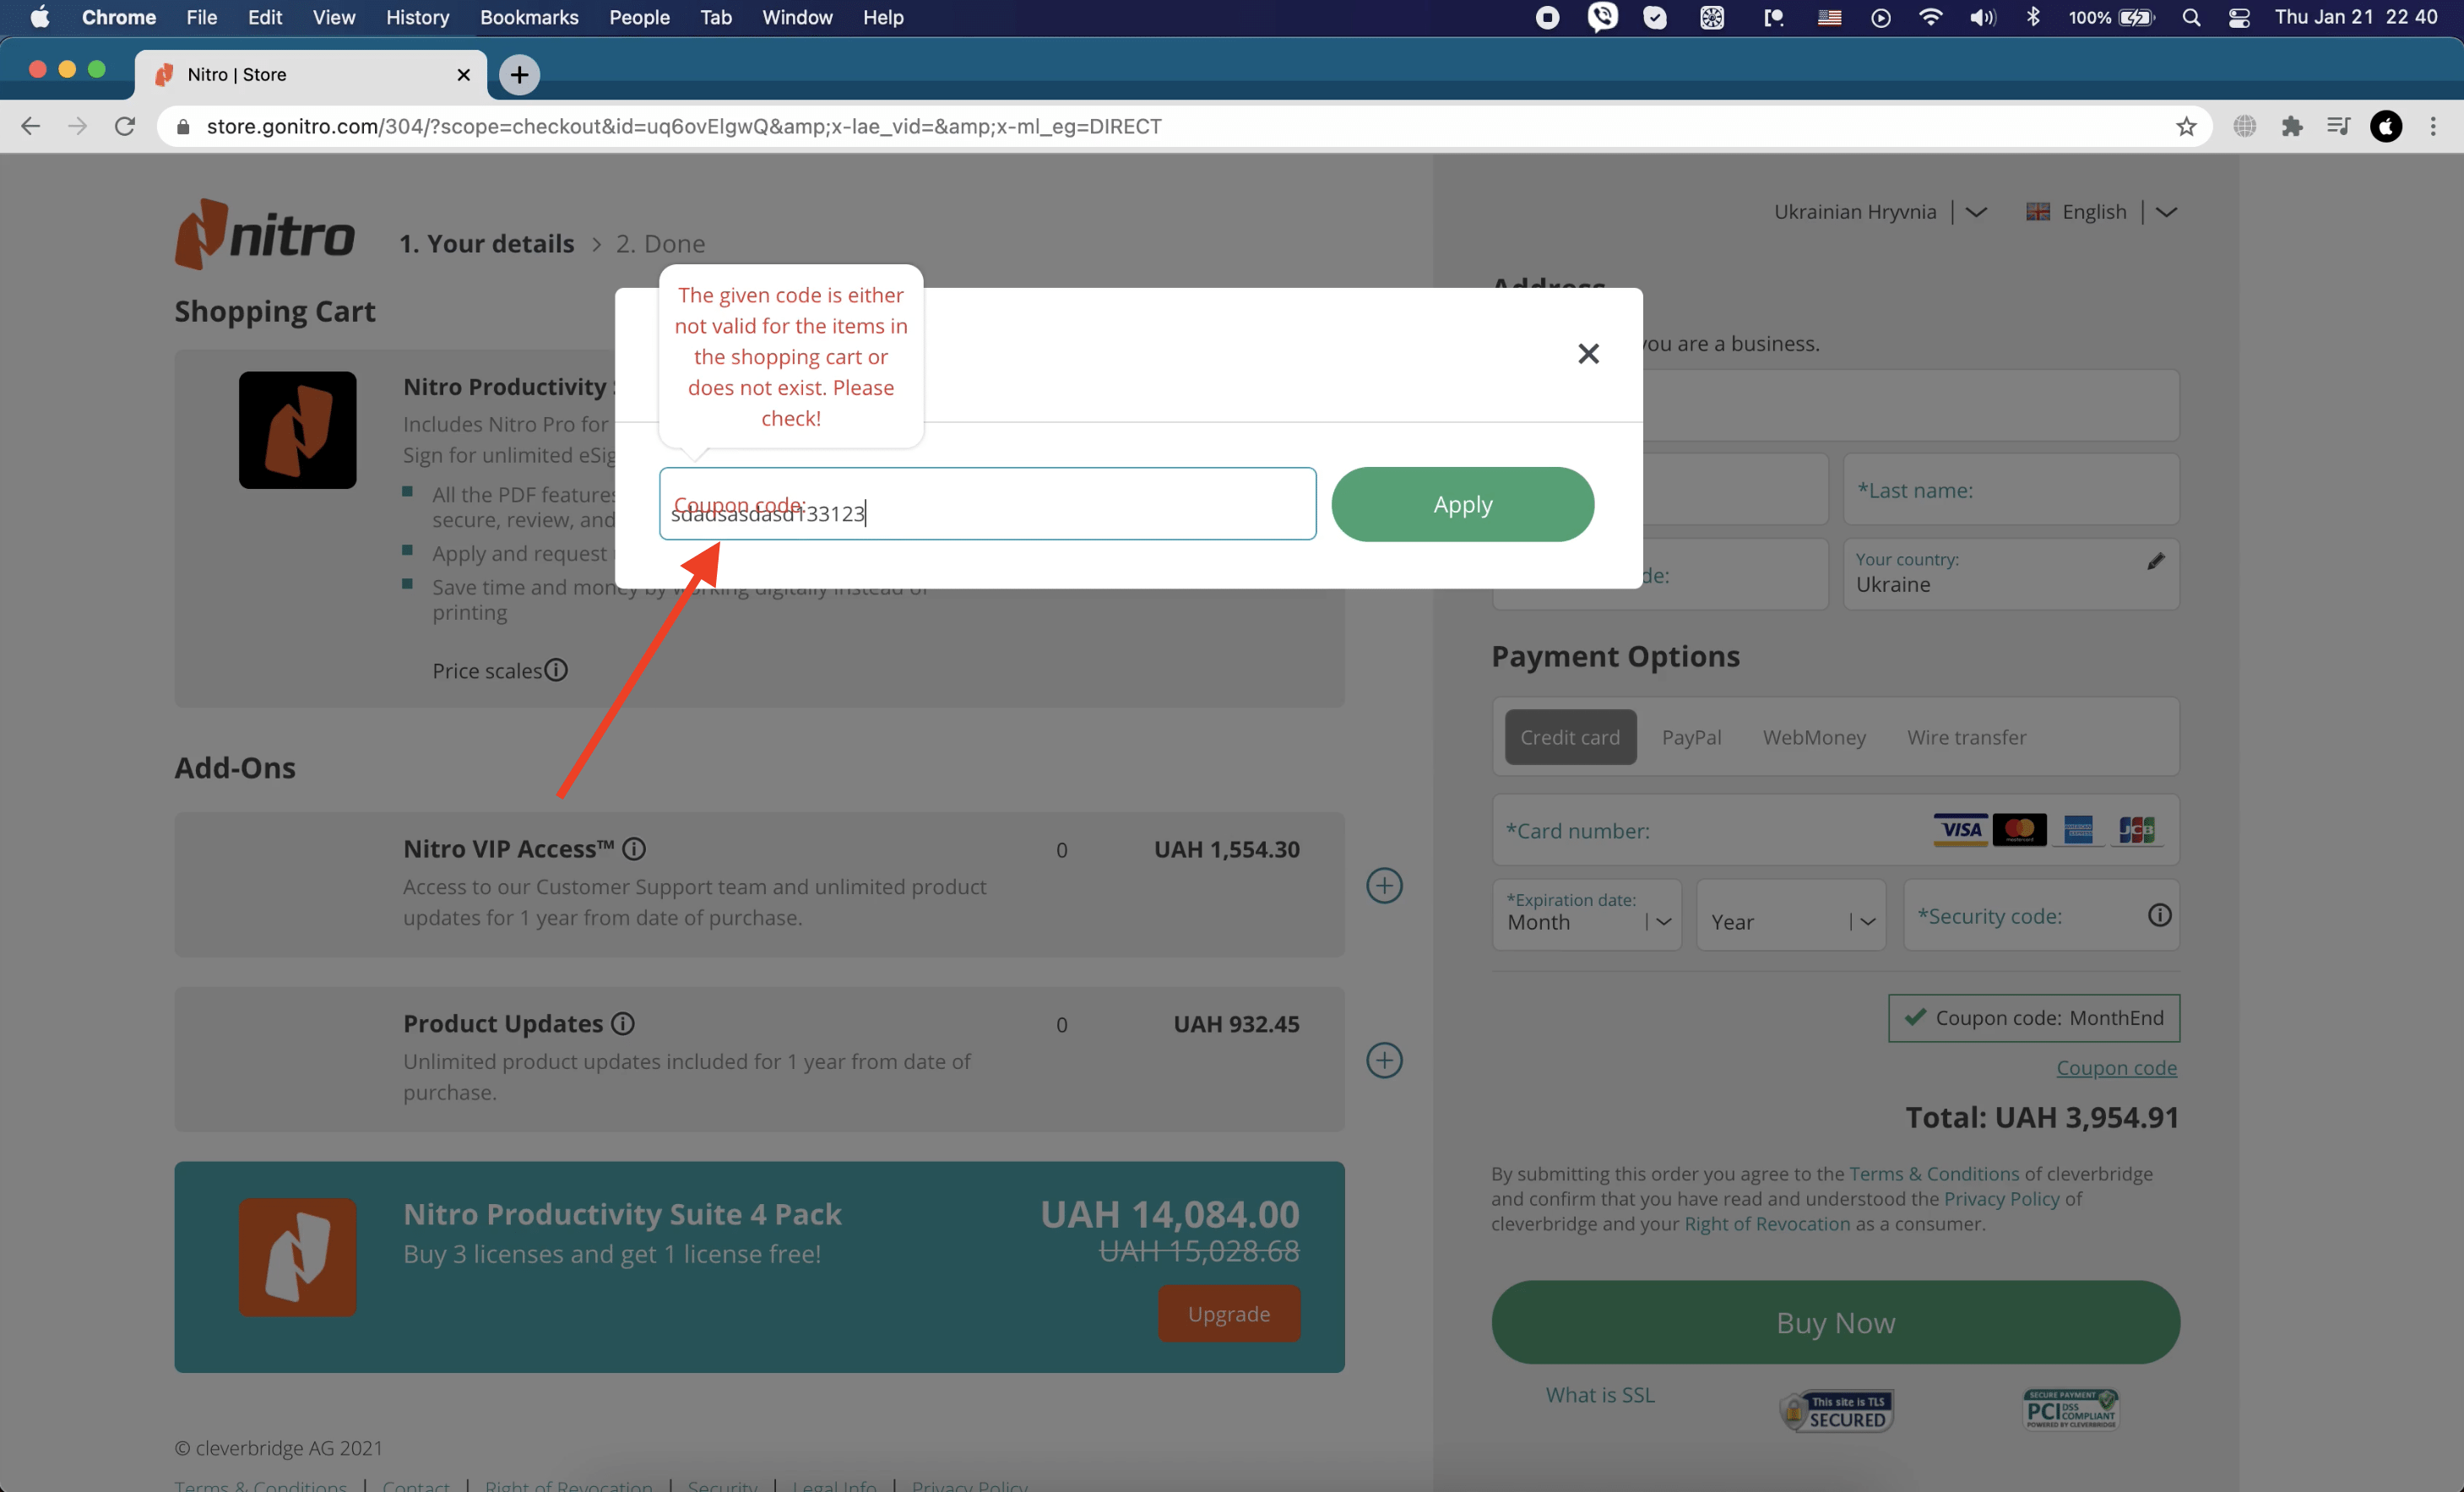 The coupon code overlaps with the input placeholder